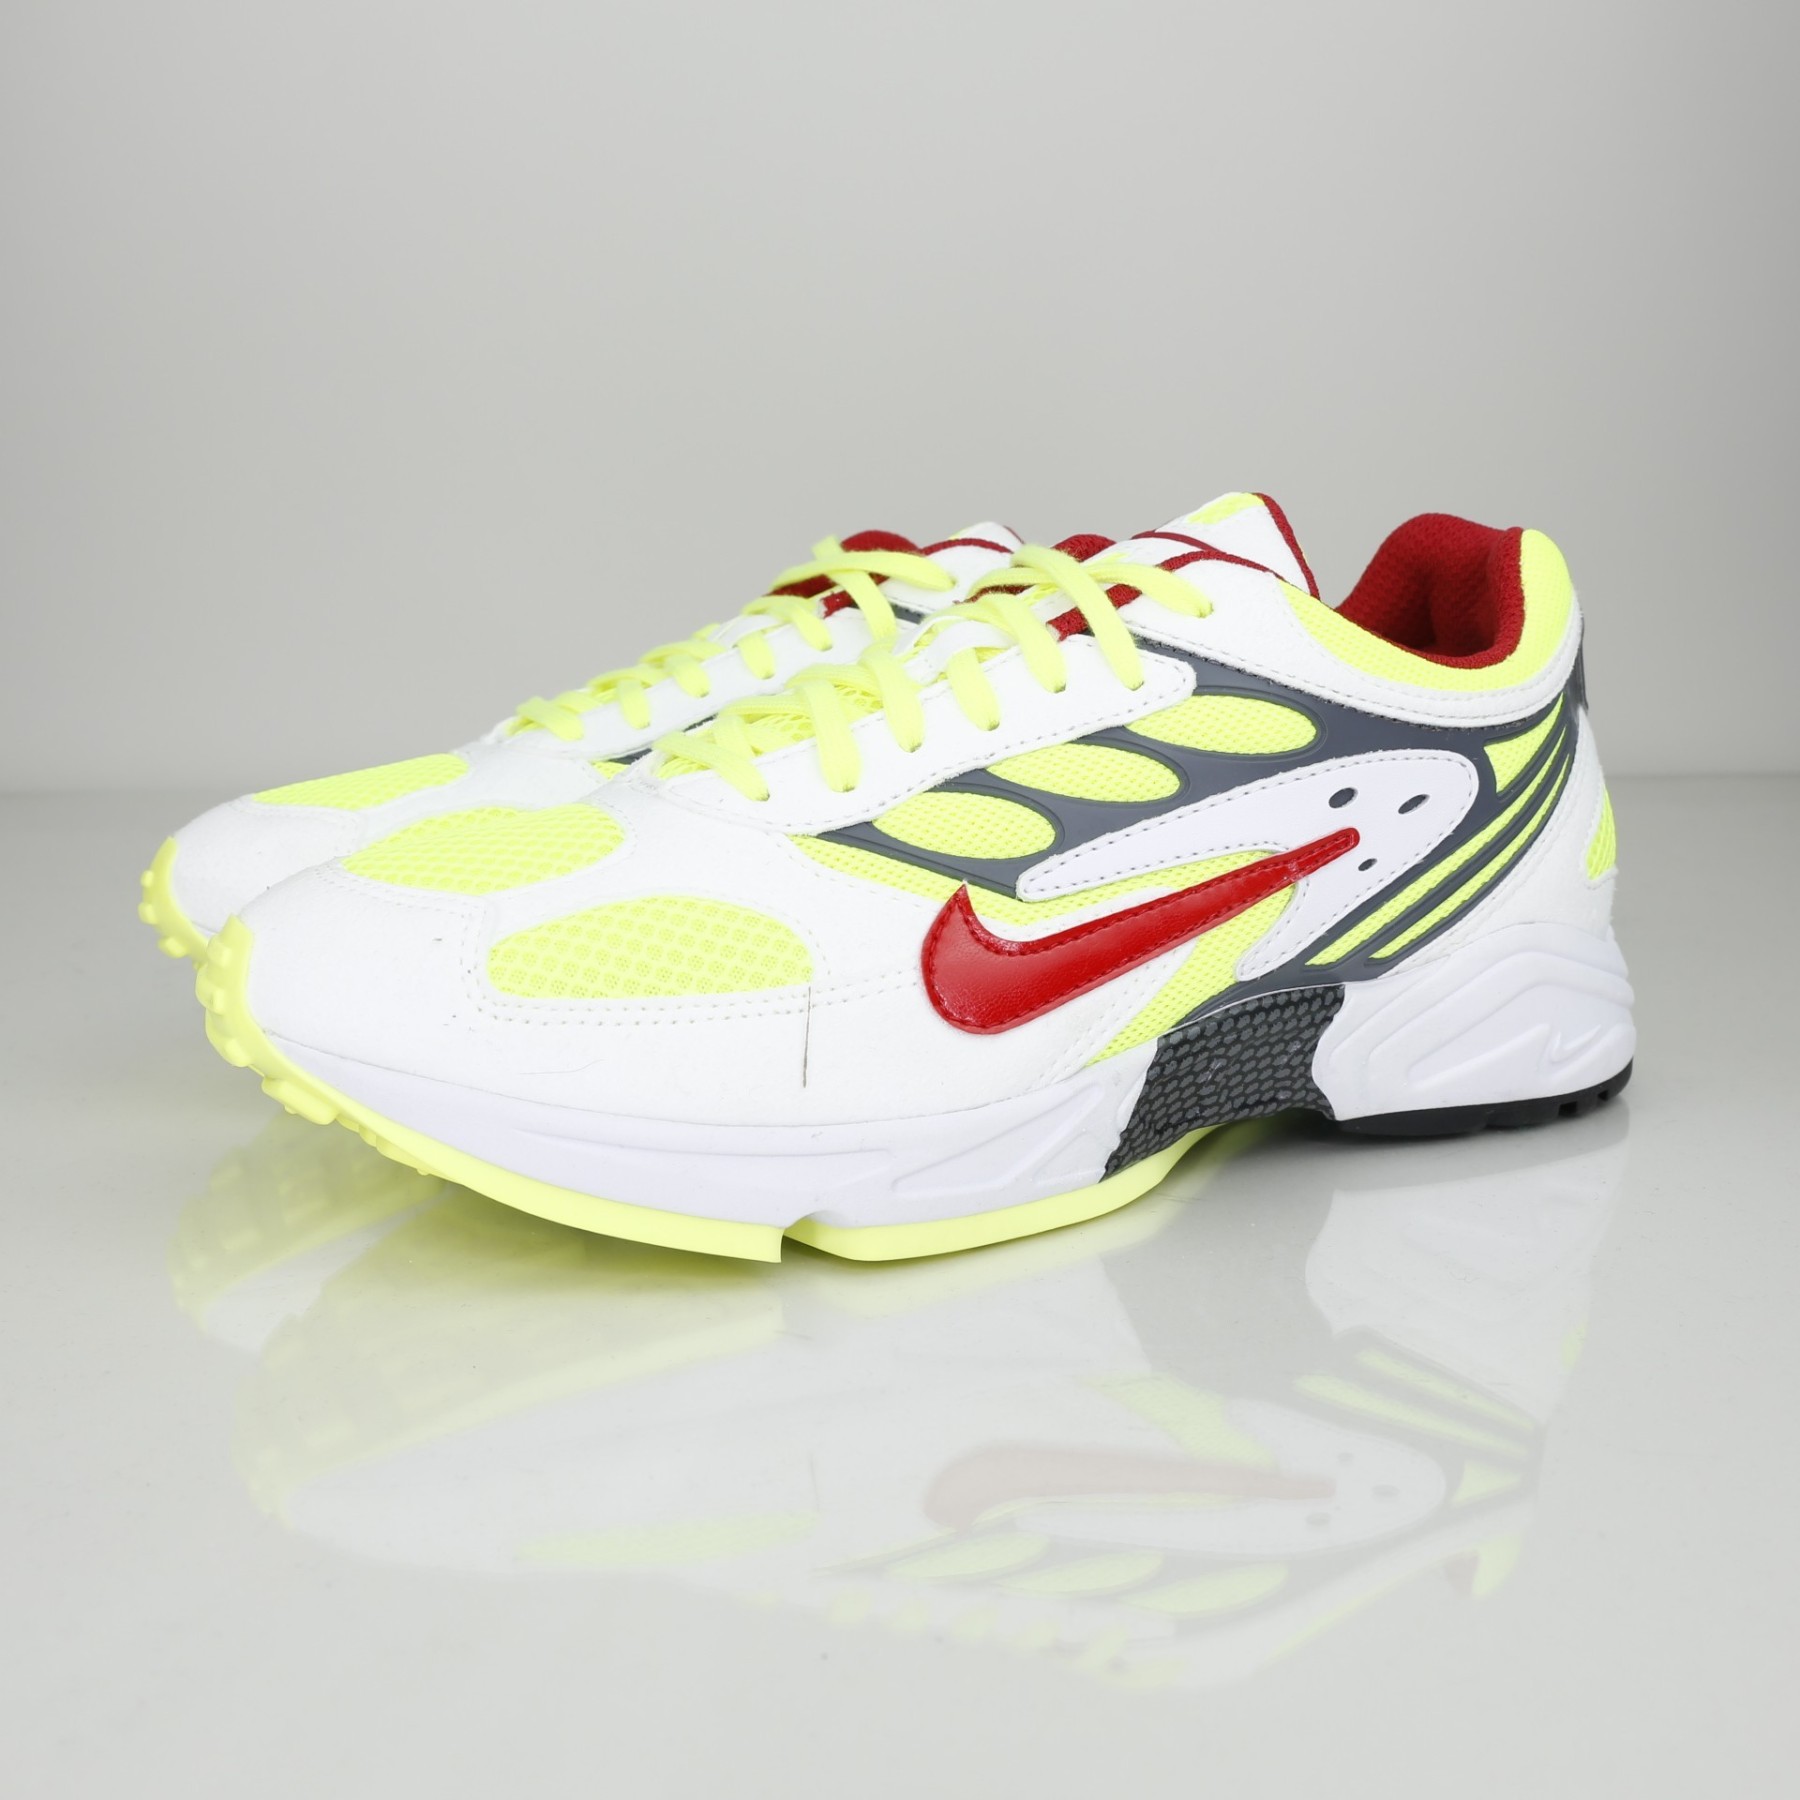 Nike AIR GHOST RACER - - AT5410-100 - RUNNING - Chez Vibe